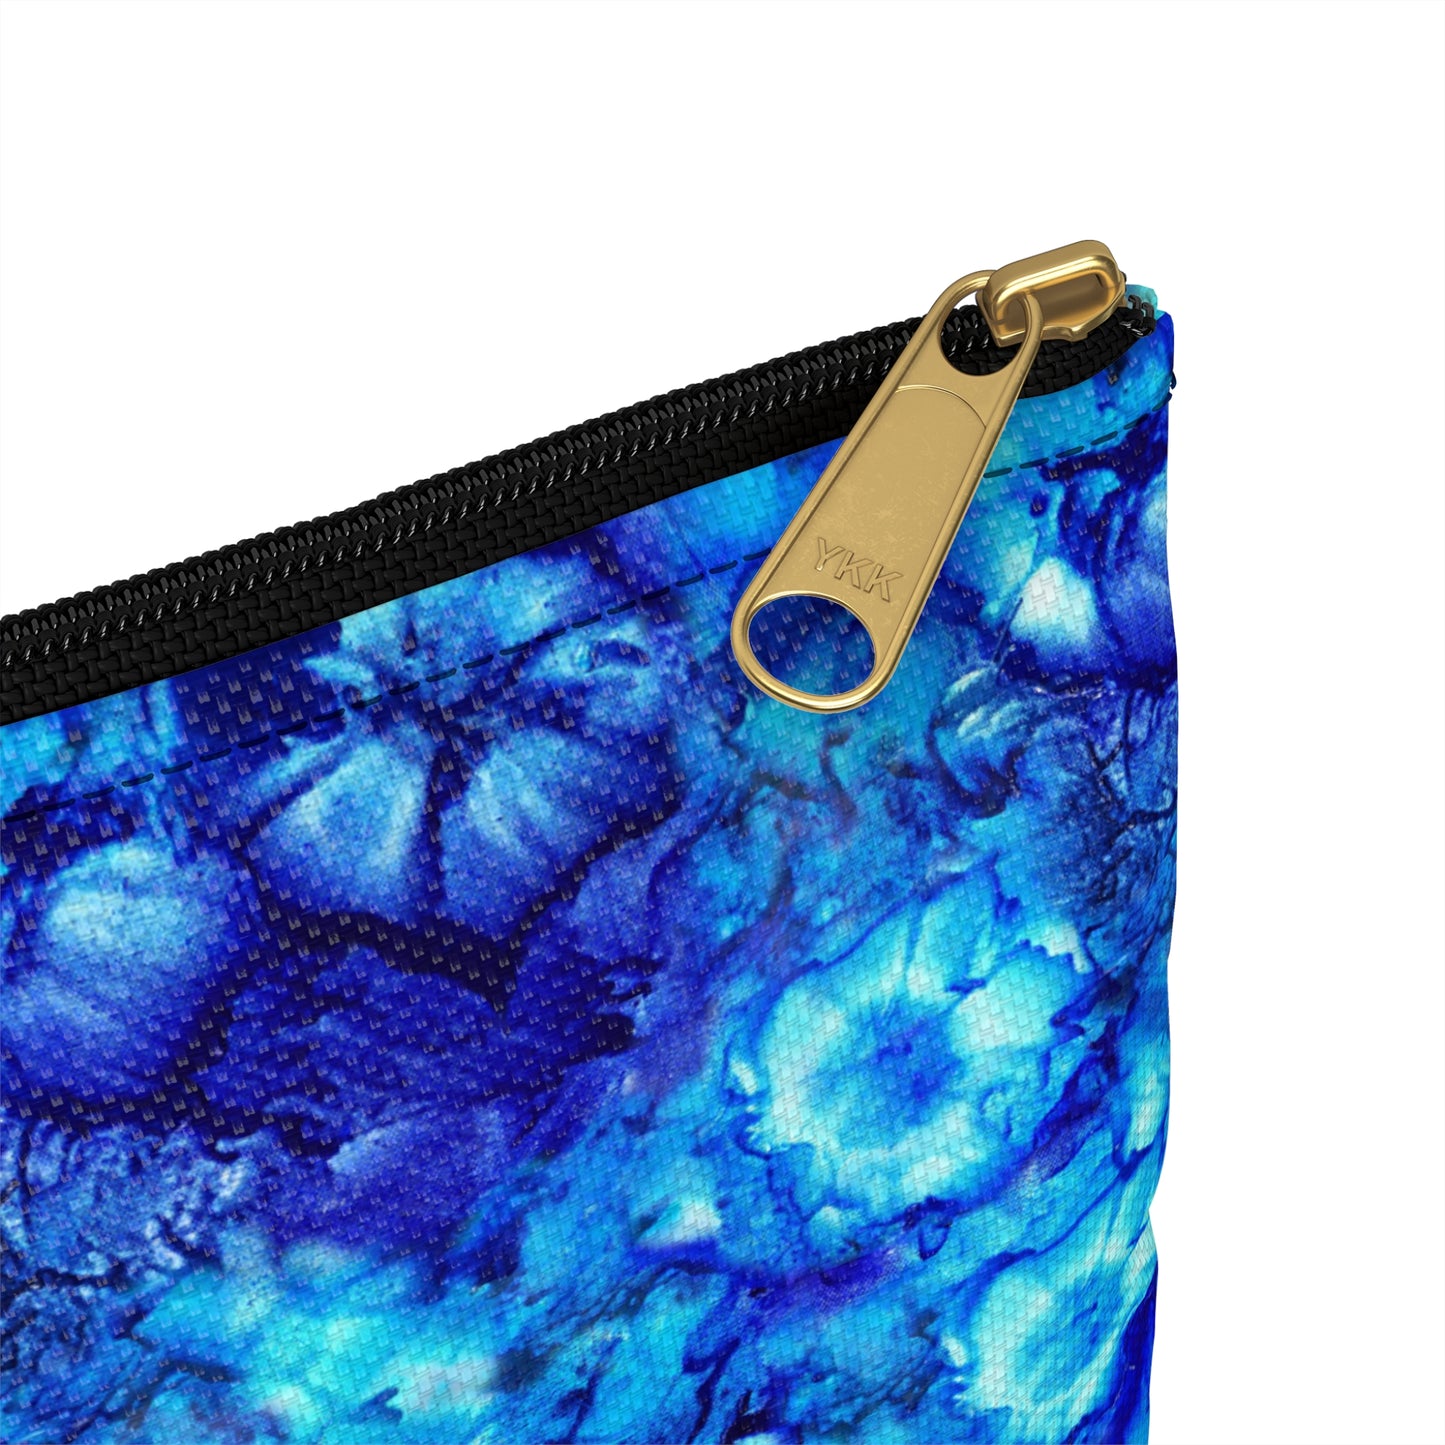 Serenity Accessory Pouch